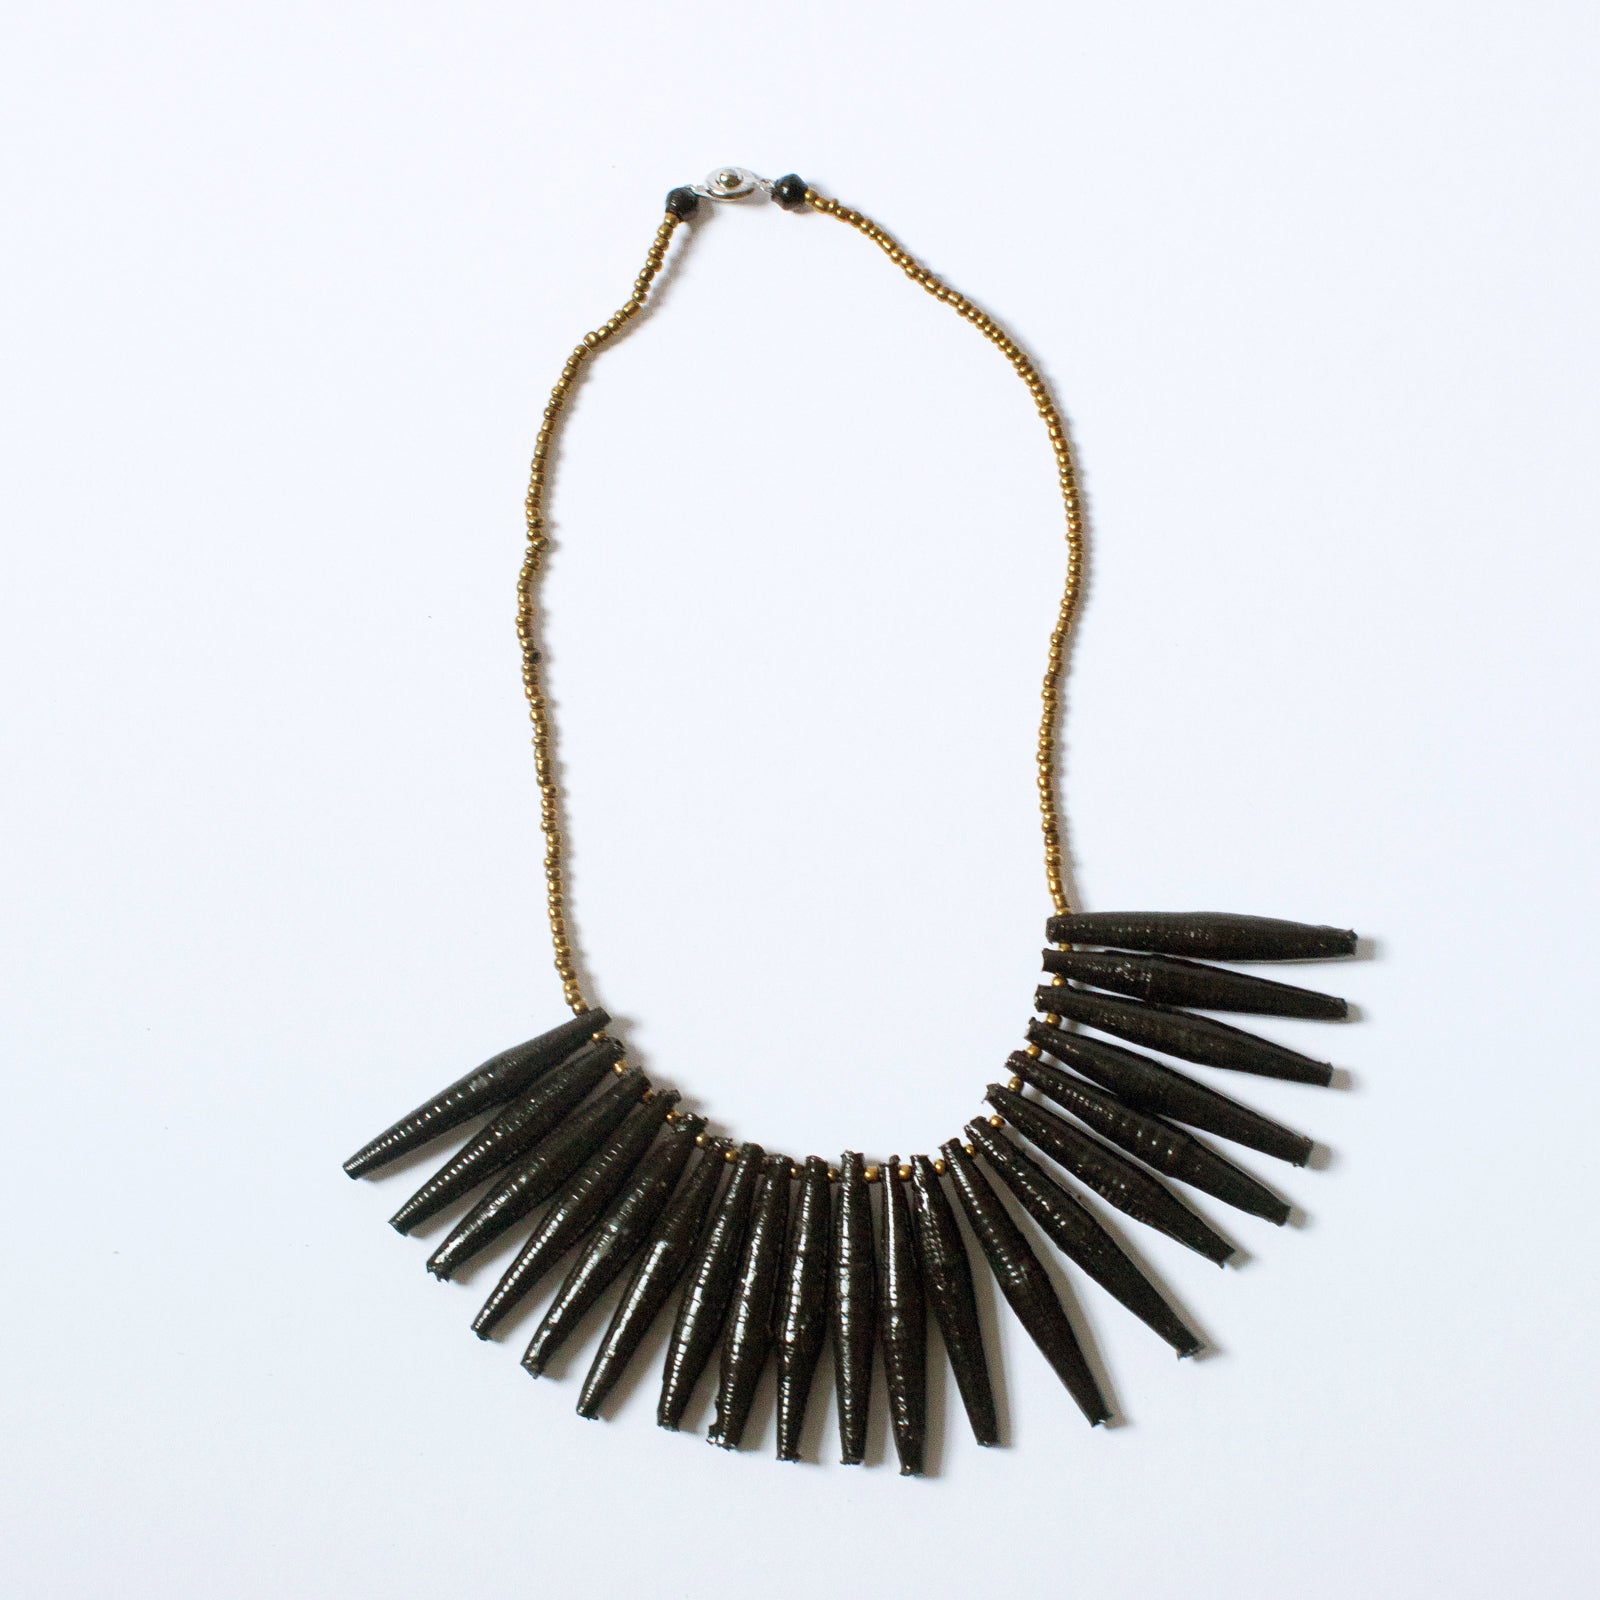 JustOne's necklace with long black paper beads dangling off, handcrafted in Uganda